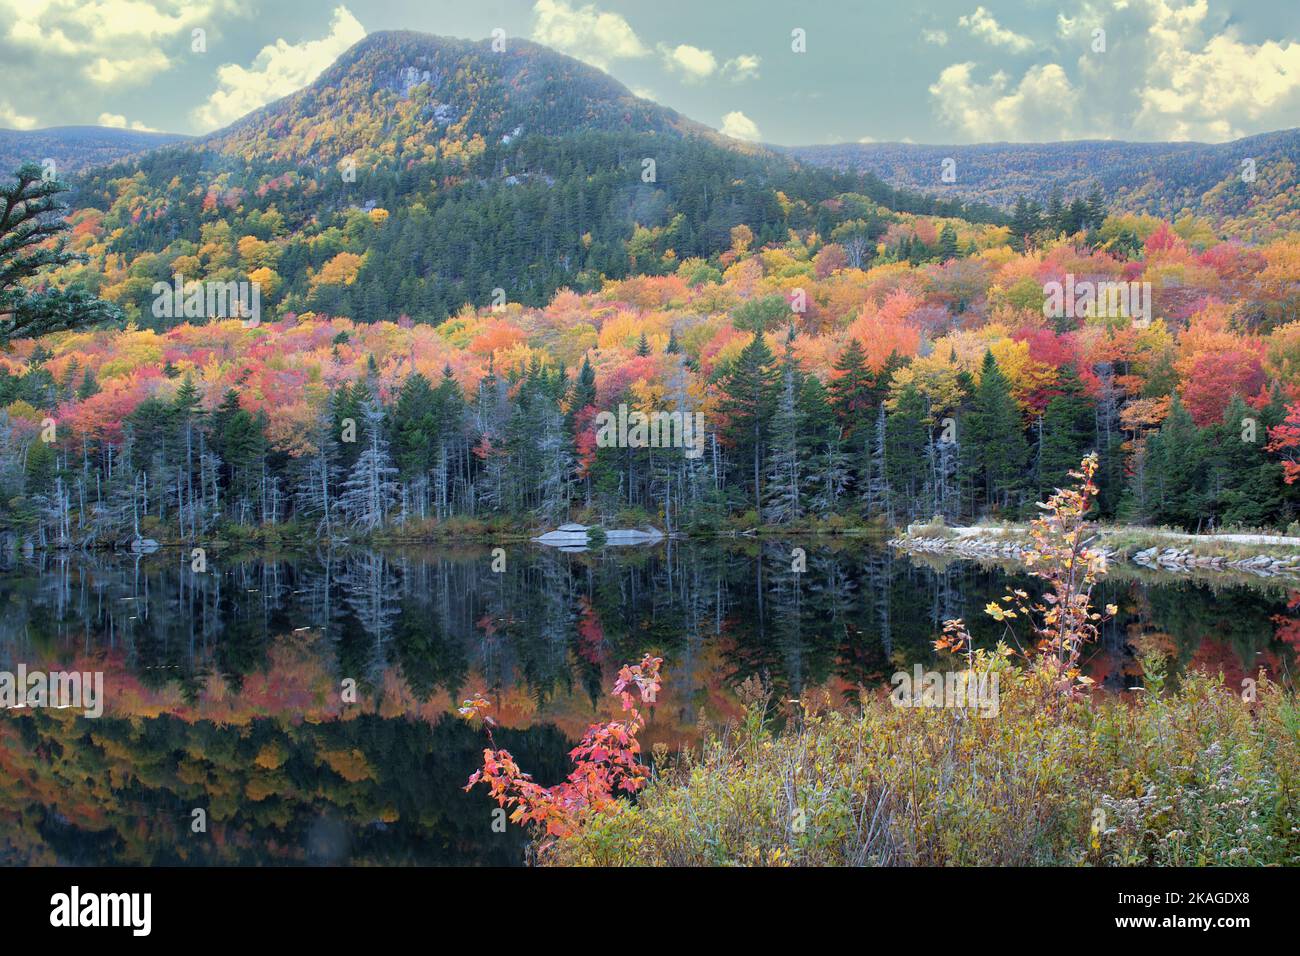 Autumn scene in Kinsman Notch, New Hampshire. Summit of Mount Moosilauke with reflection of colorful fall foliage on calm surface of Beaver Pond. Stock Photo